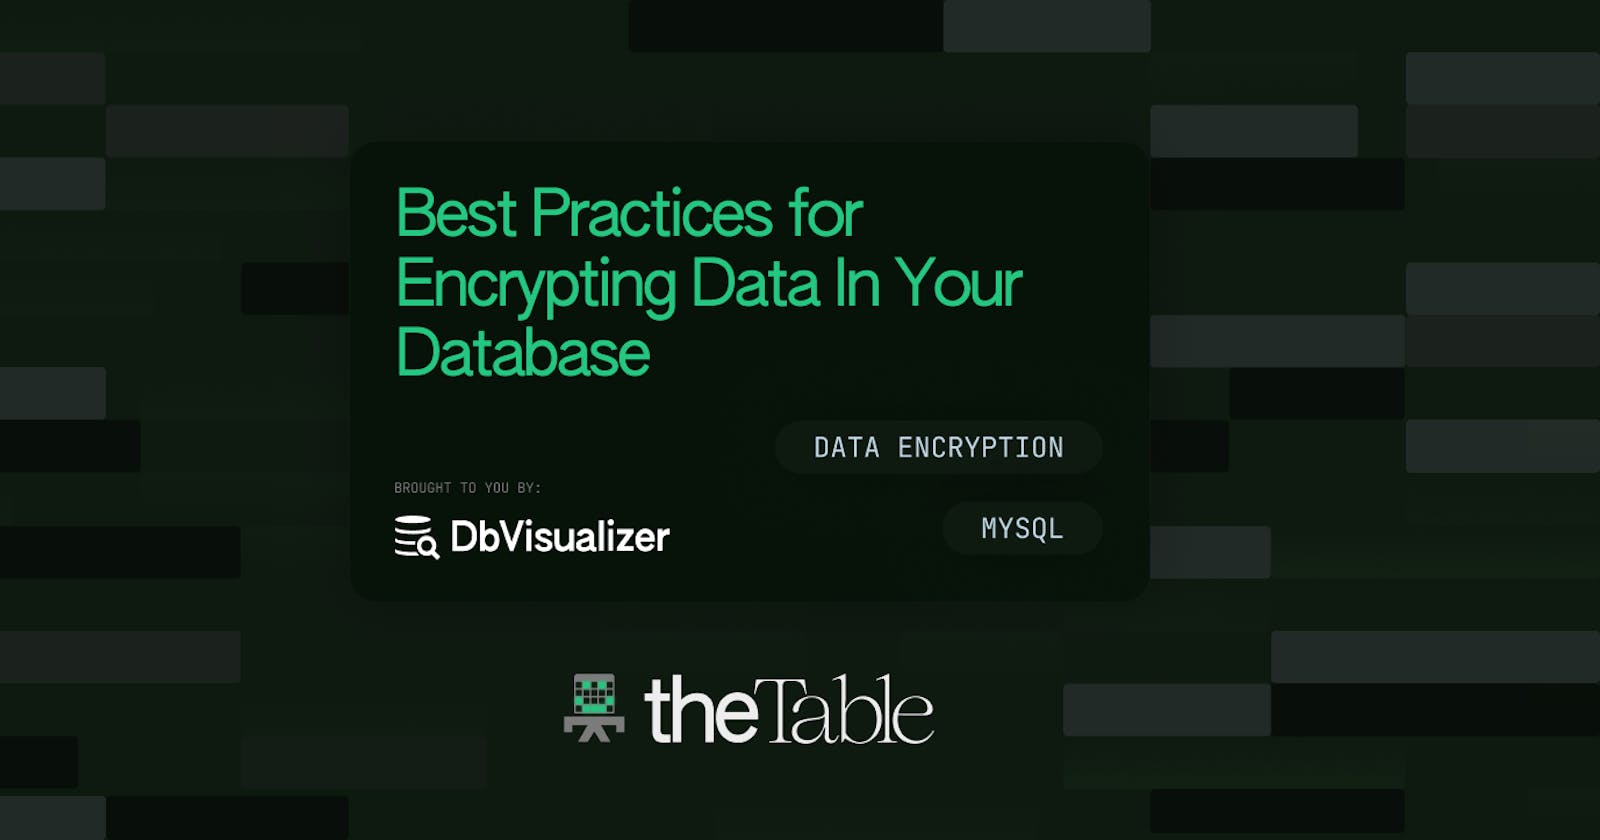 Best Practices for Encrypting Data In Your Database